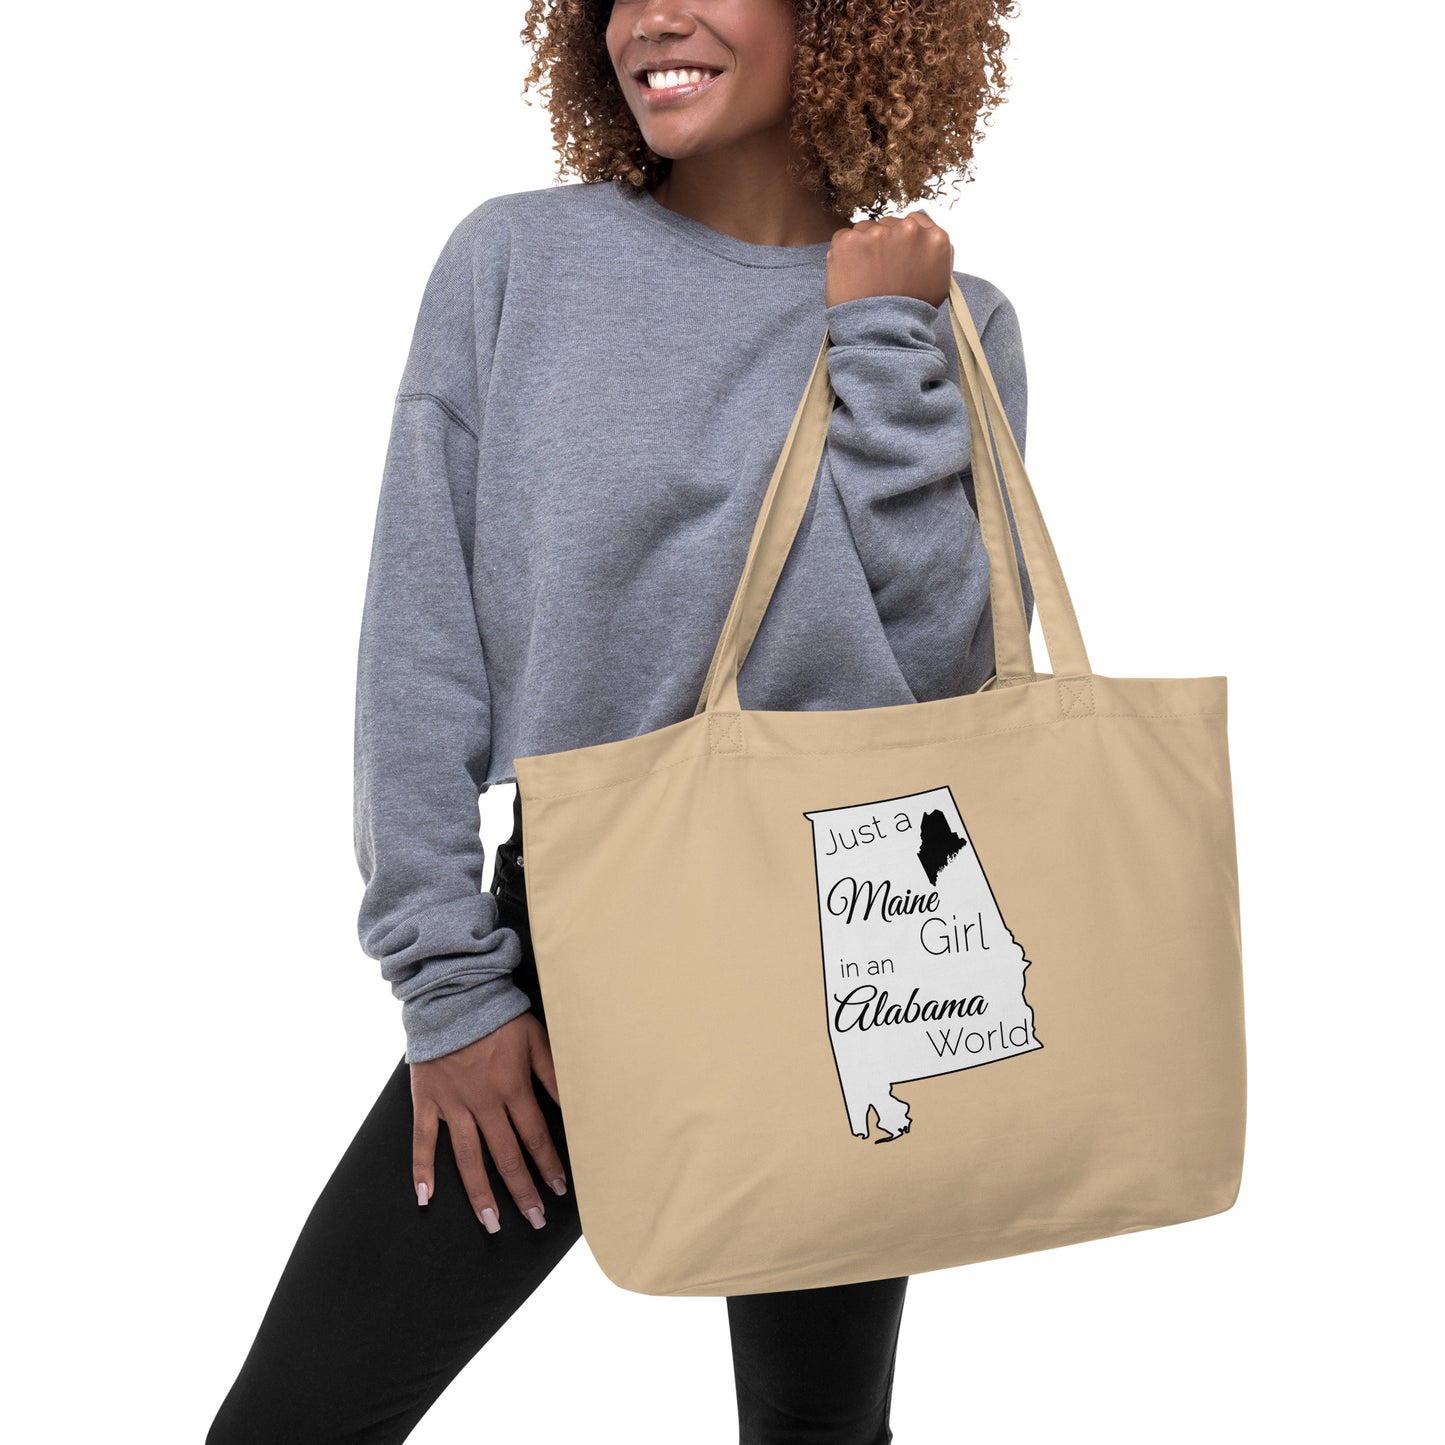 Just a Maine Girl in an Alabama World Large organic tote bag